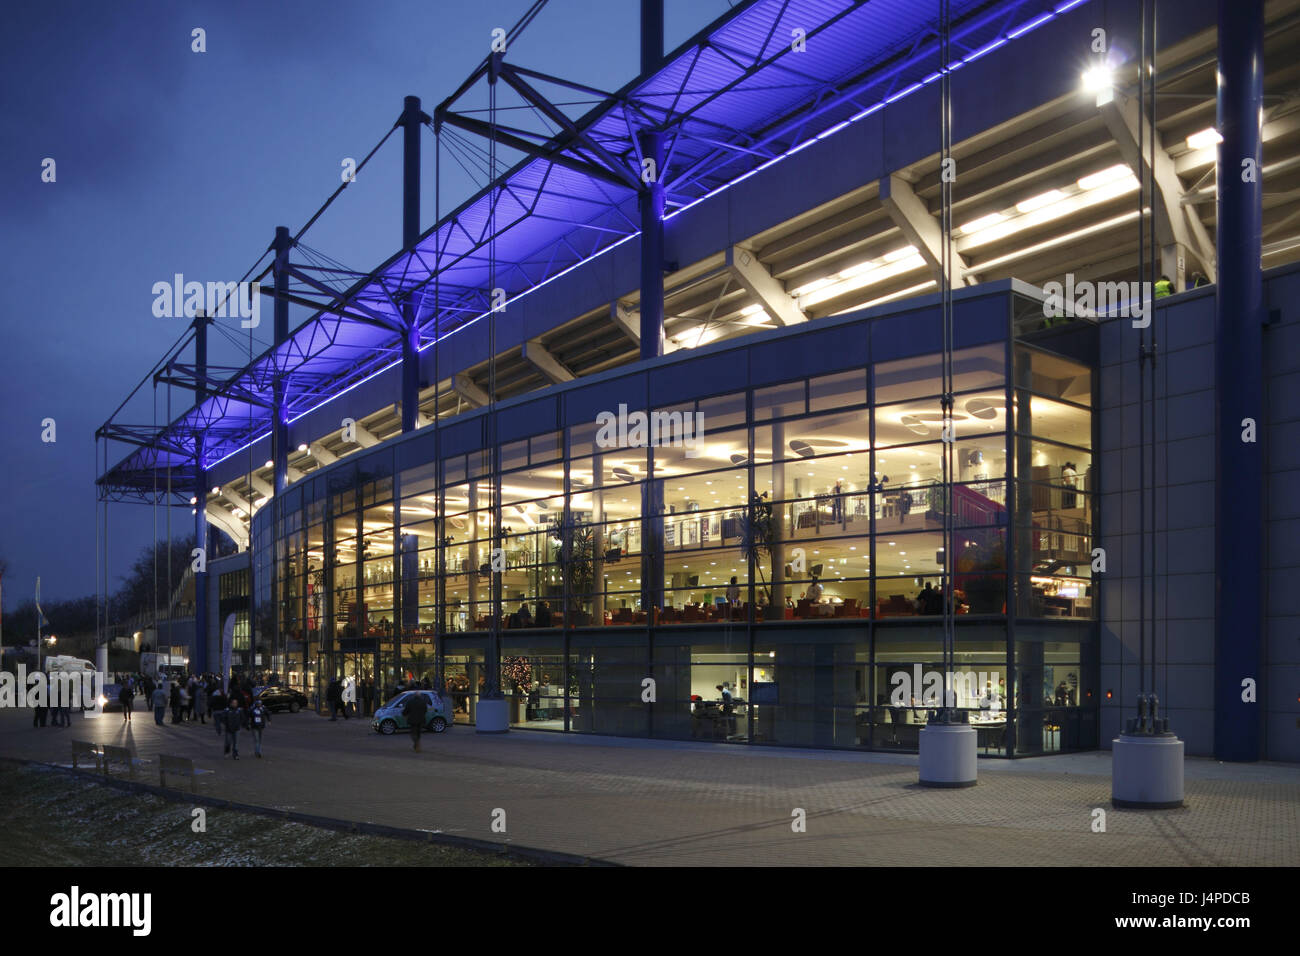 Germany, North Rhine-Westphalia, Duisburg, football stadium, evening, lighting, dysentery area, the Lower Rhine, Duisburg-Wedau, MSV arena, football arena, sport, football, stand, stadium forecourt, outside, main entrance, football fans, people, leisure time, dusk, arena, national league, place of interest, Stock Photo